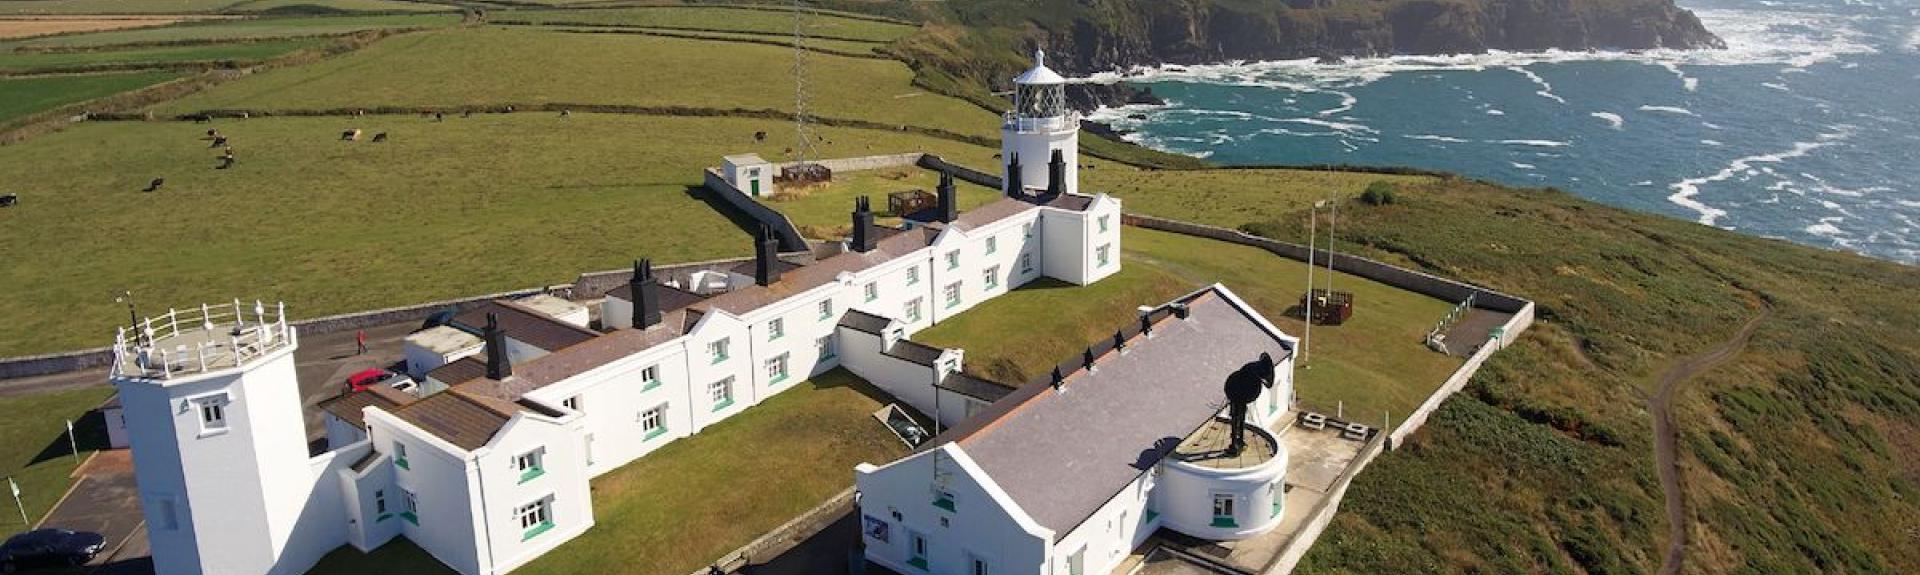 Aerial view of a Lighthouse and crew buildings atop cliffs overlooking the sea at Lizard Point in Cornwall.